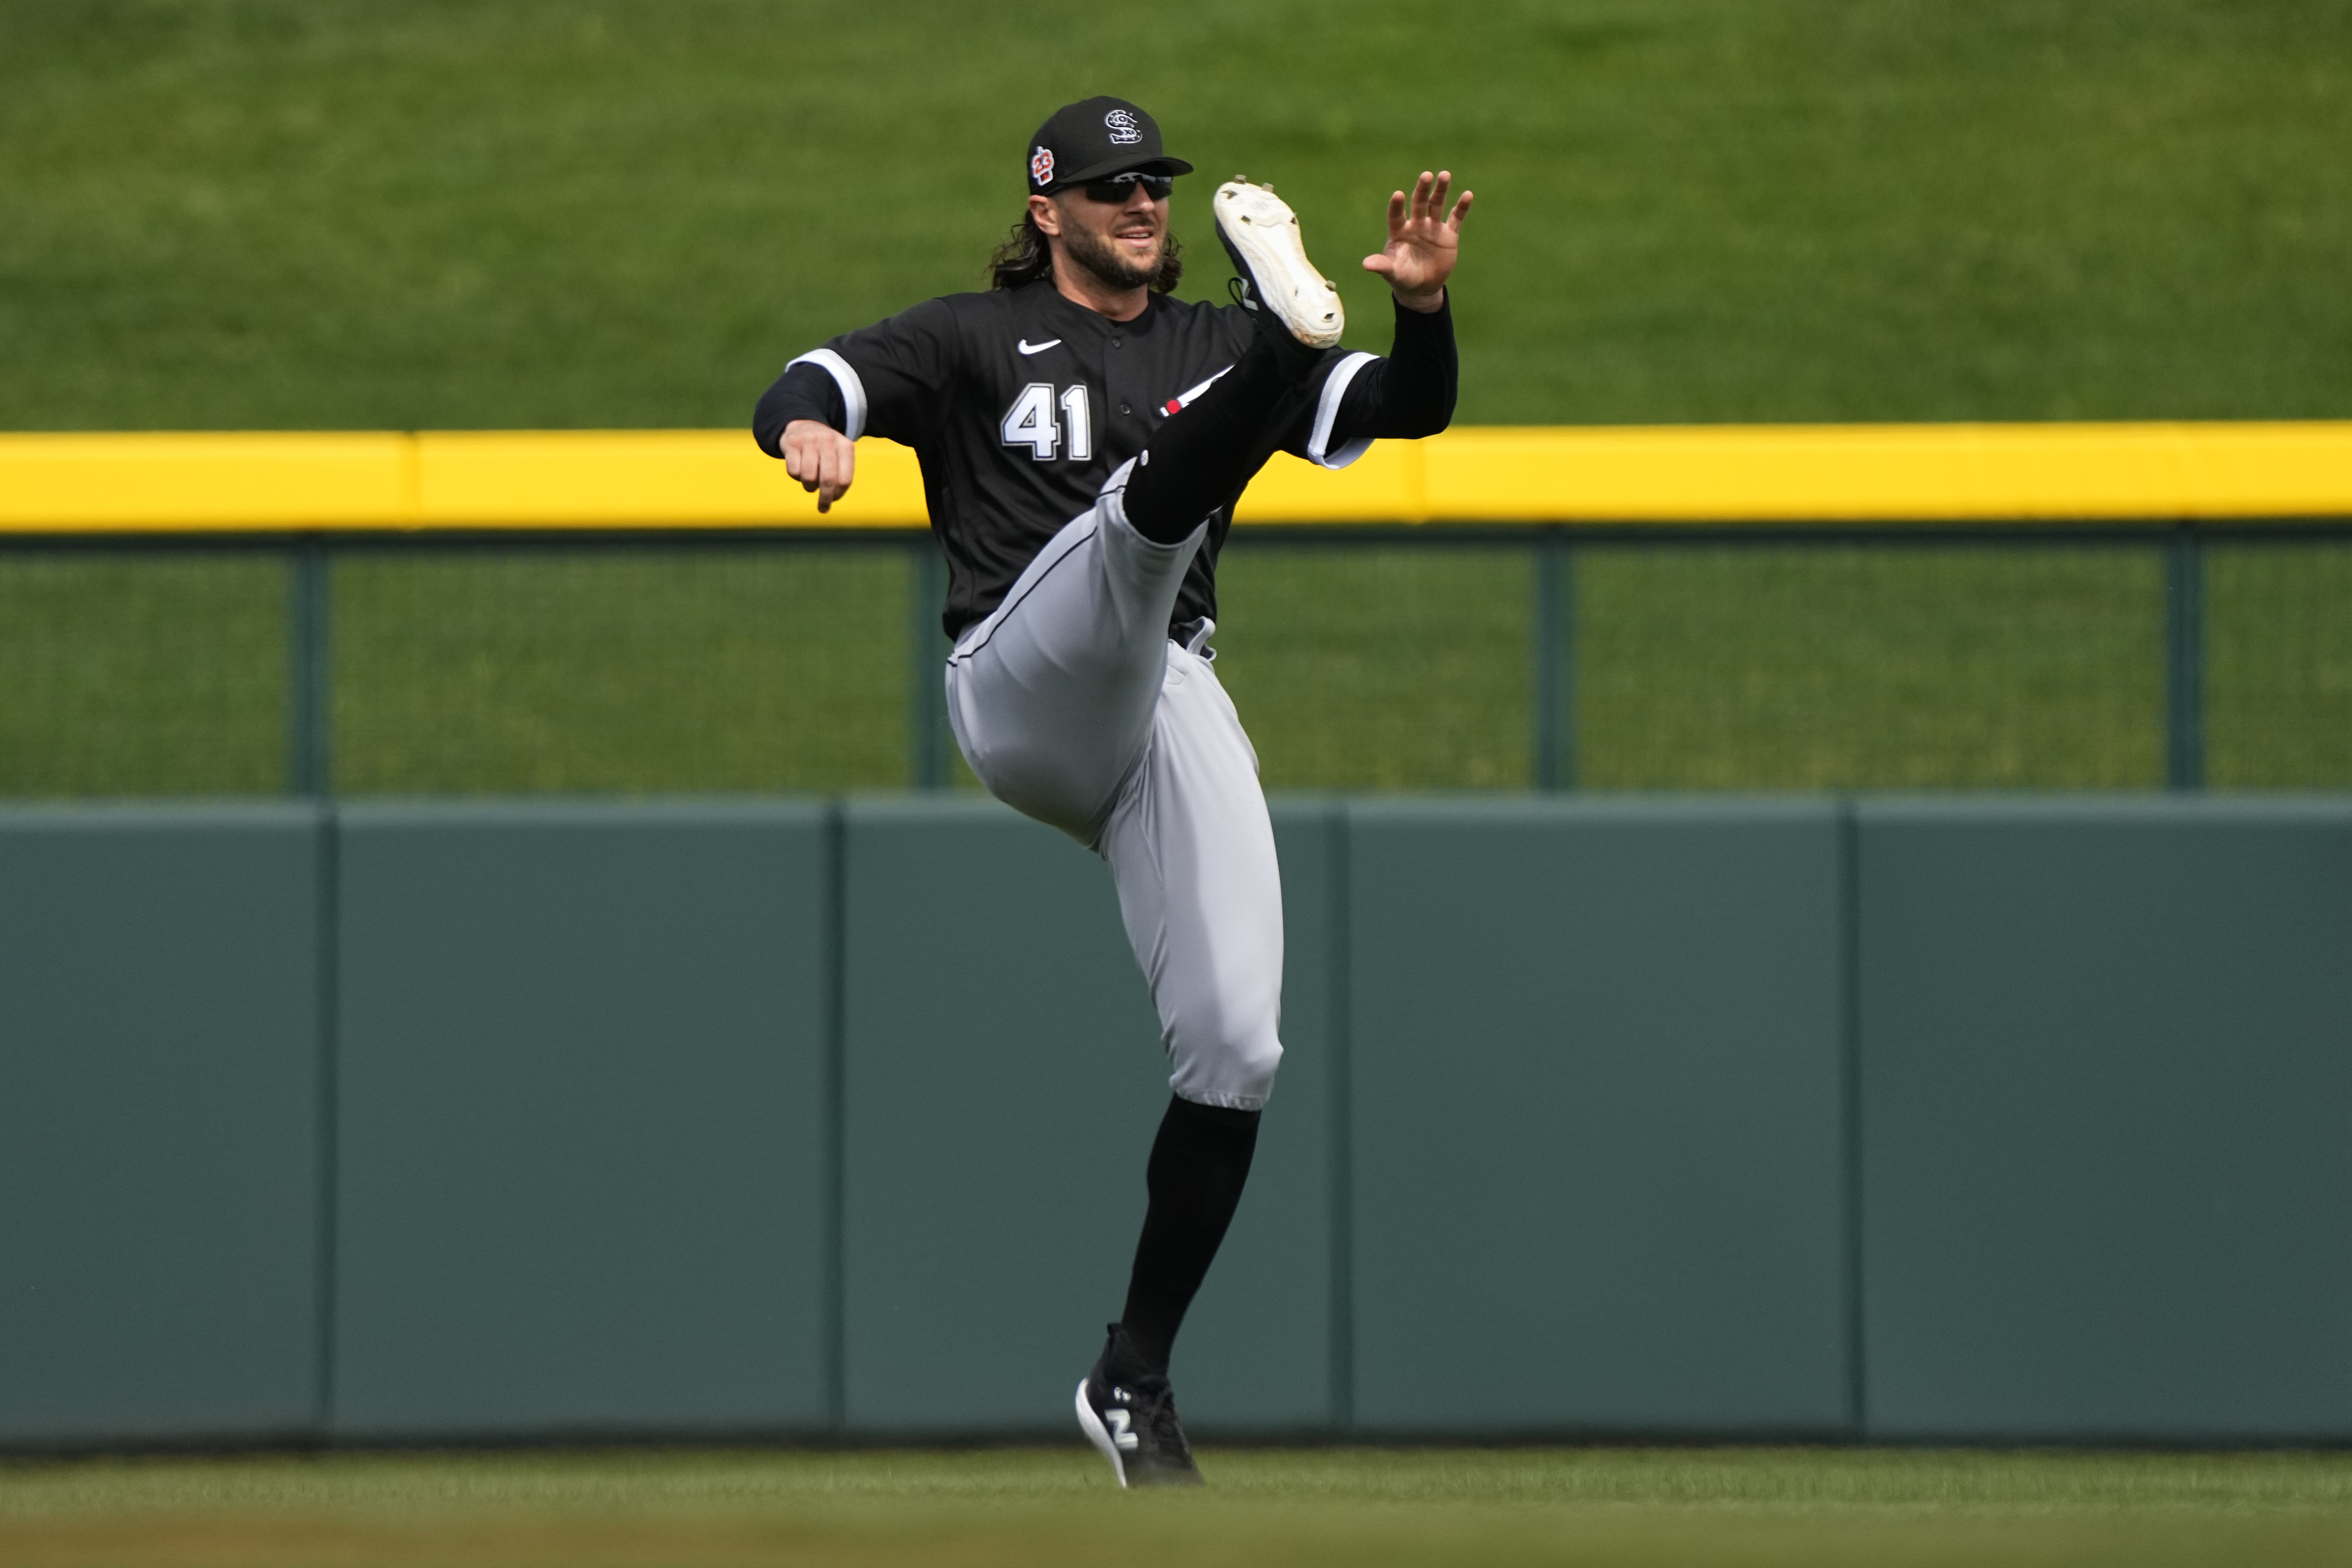 Cubs & White Sox: Teams open spring training on Wednesday